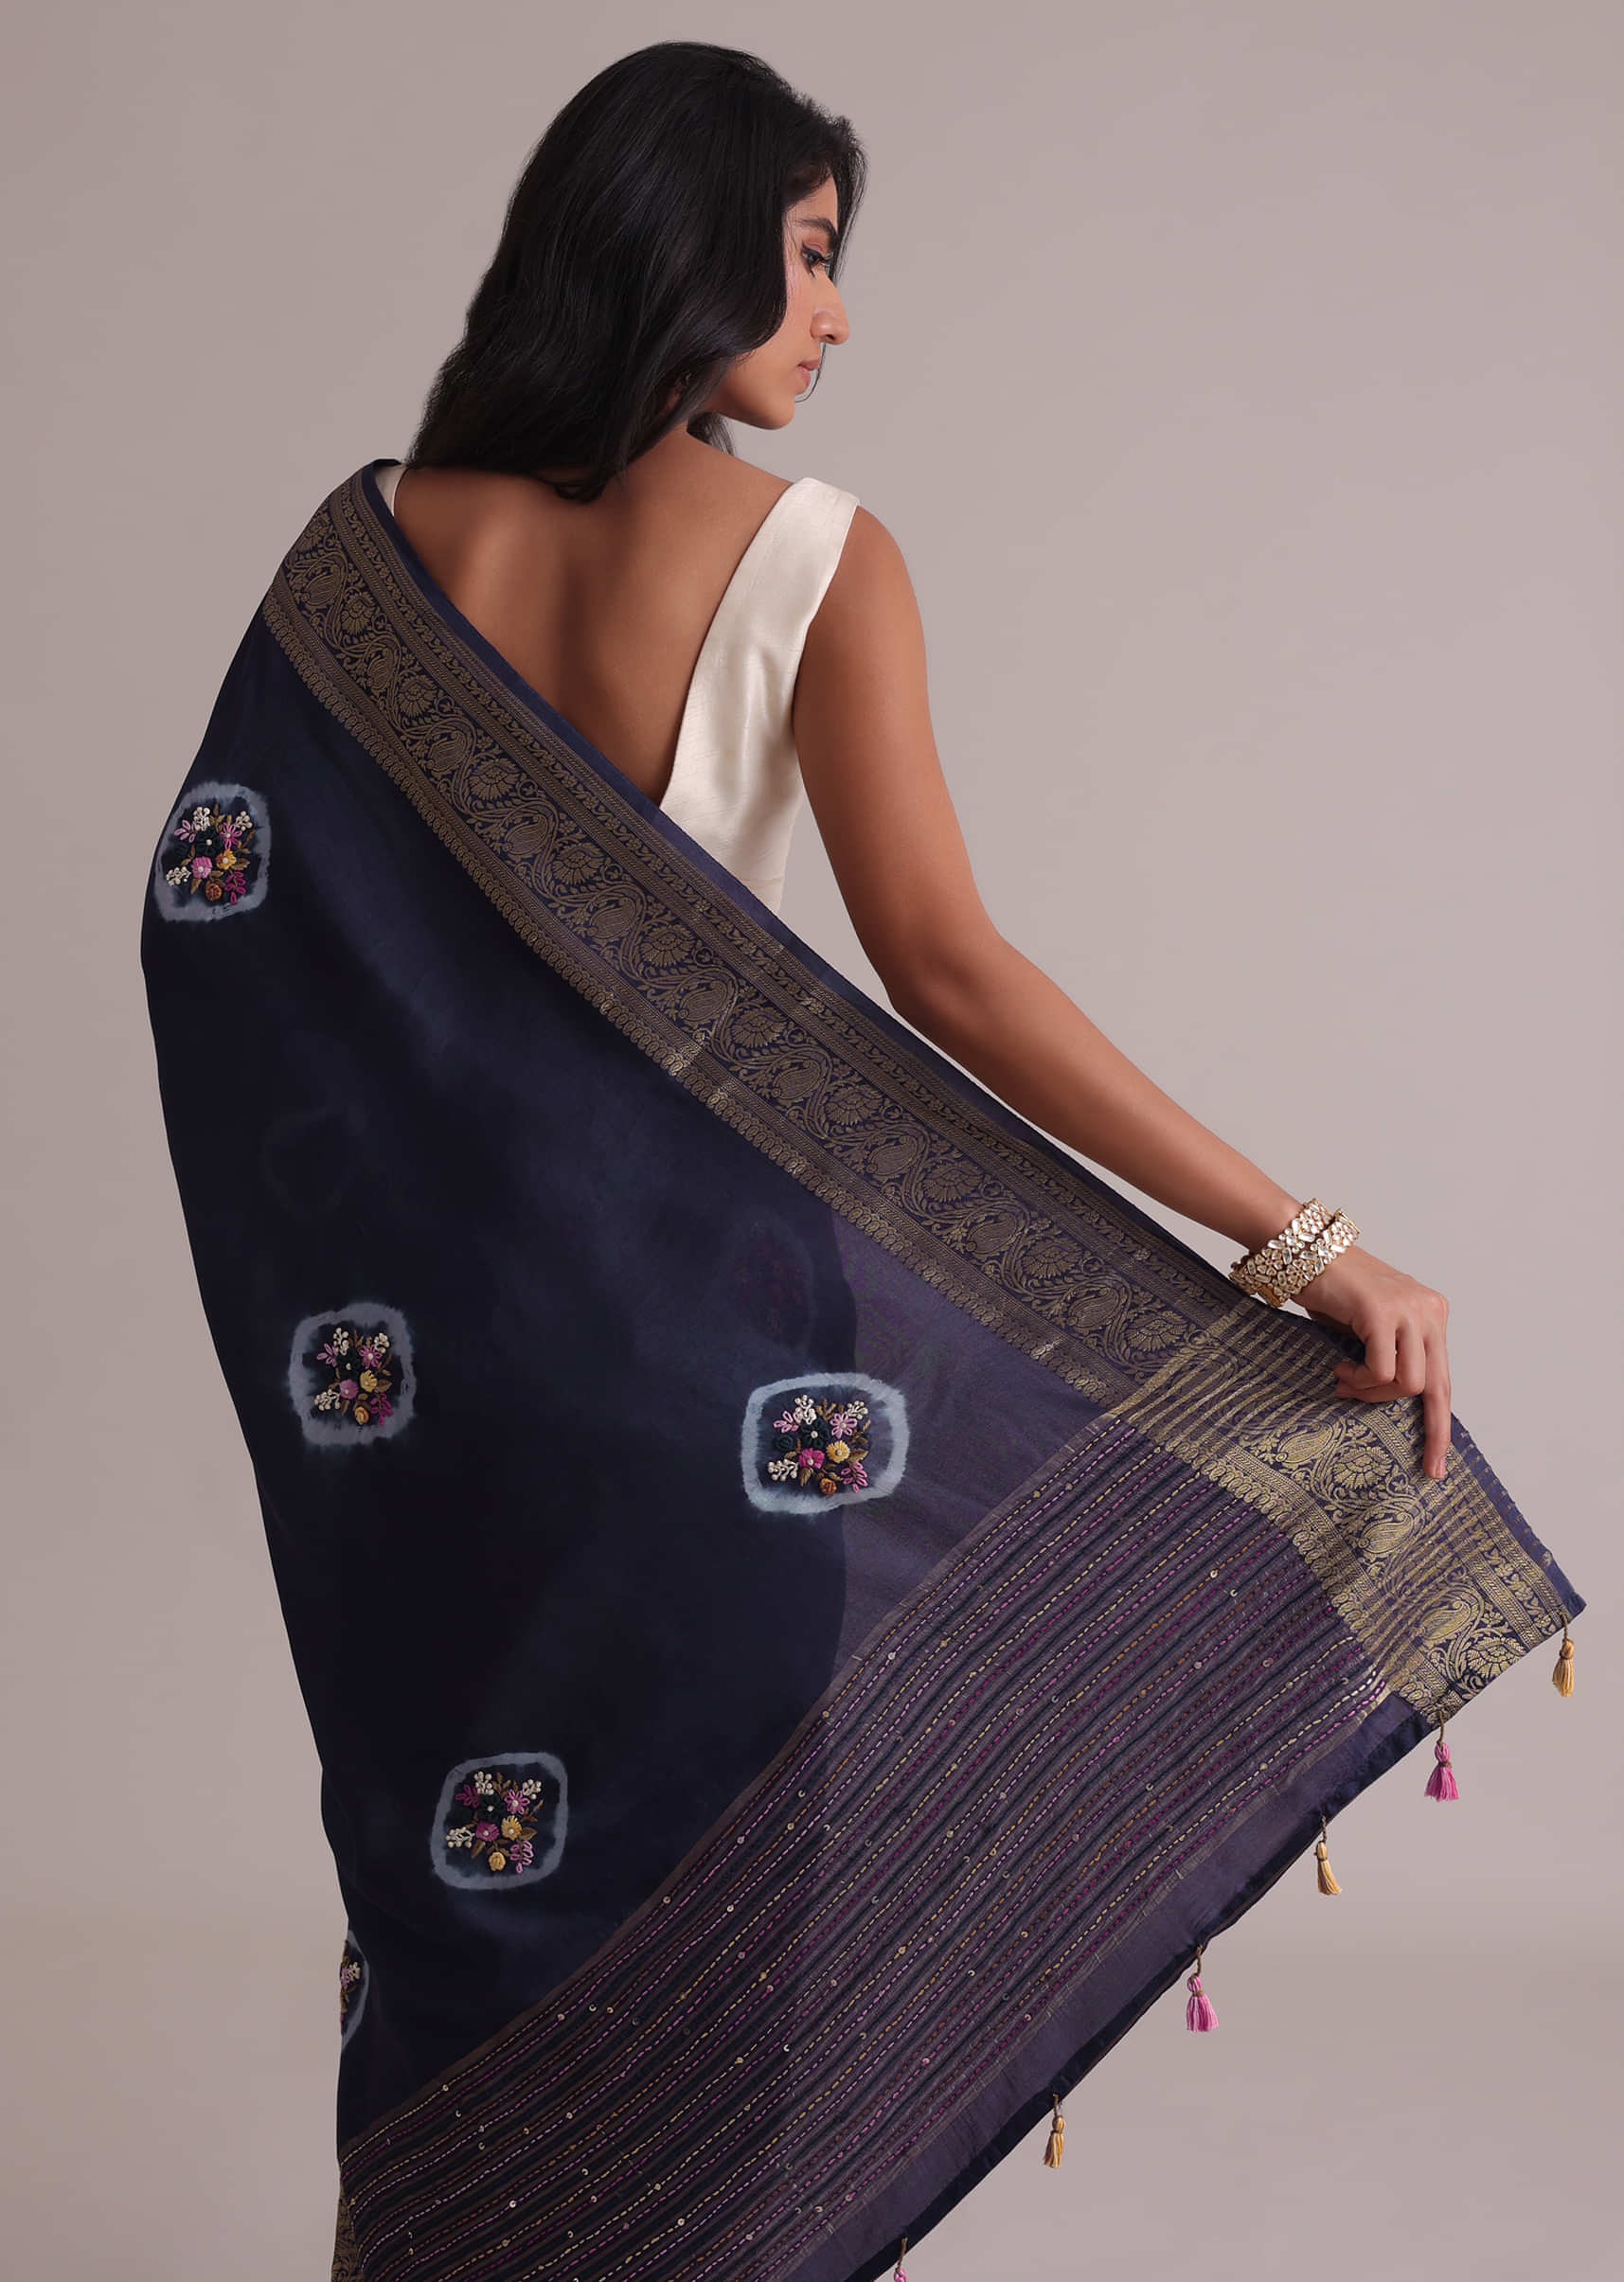 Blue Resham 3D Bud Embroidered Saree With Brocade And Thread Work In Dola Crepe